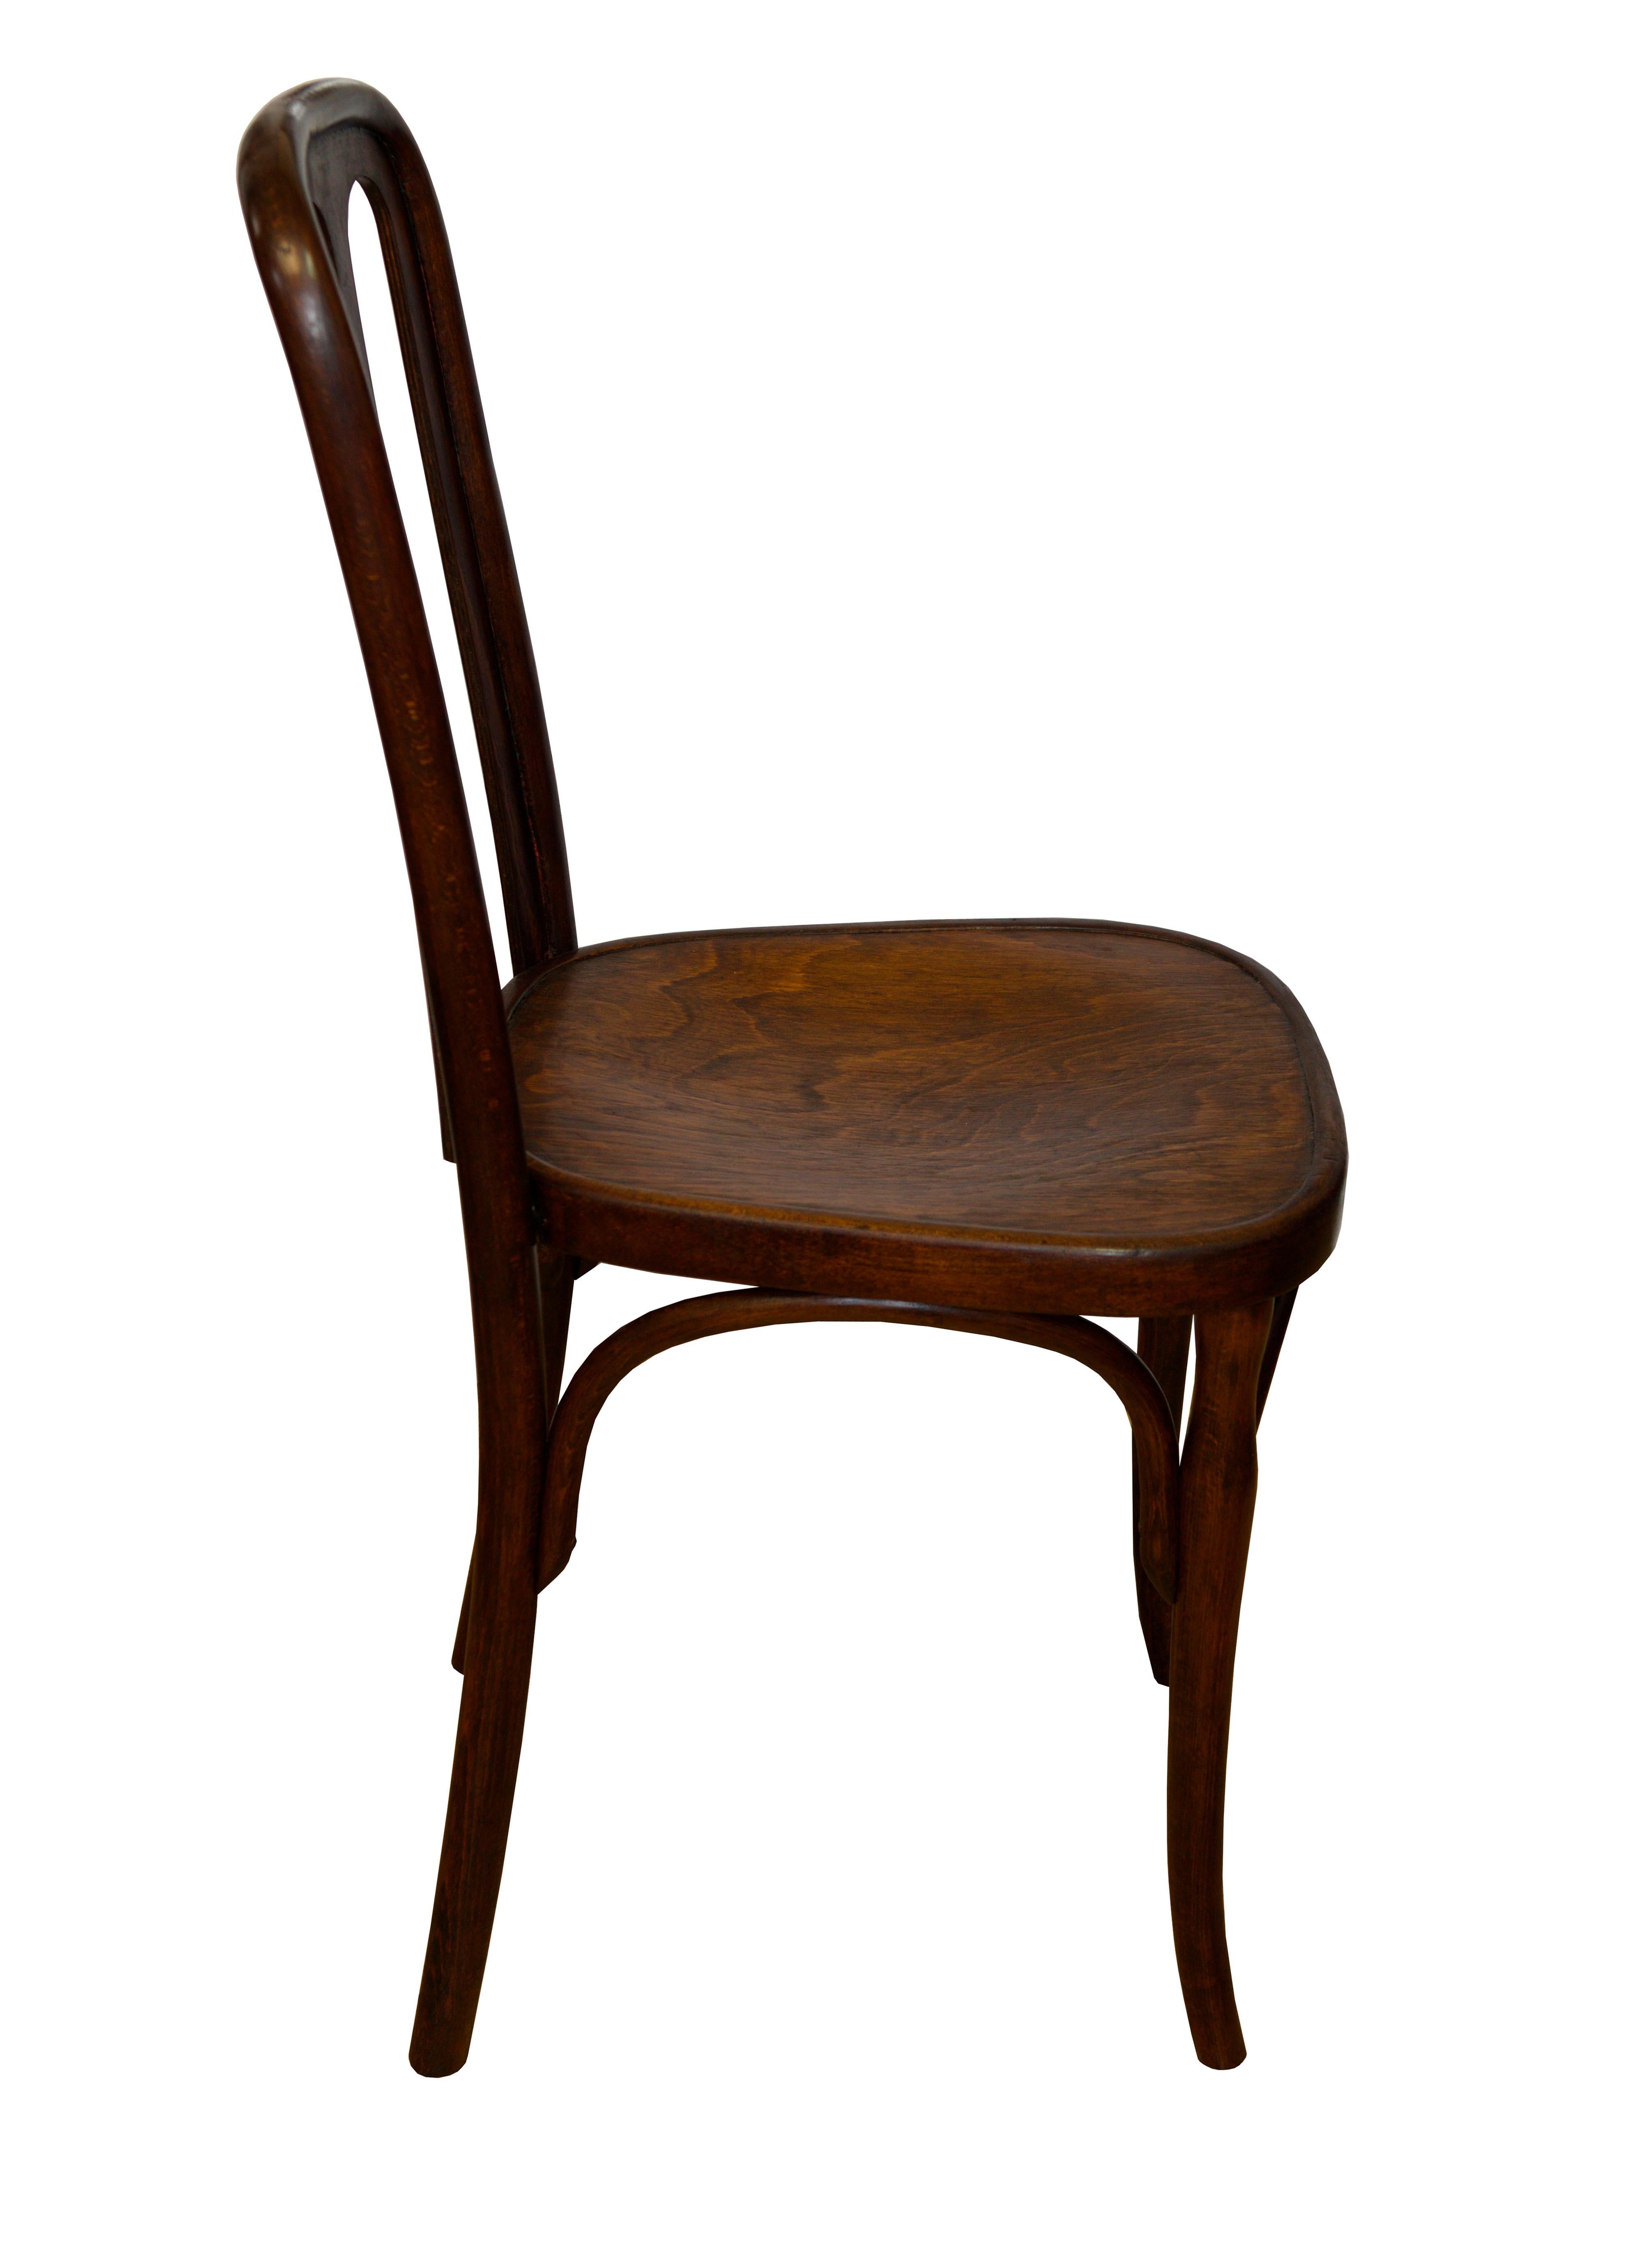 Dining Chair by Josef Hoffmann for J. & J. Kohn In Good Condition For Sale In Brno, CZ